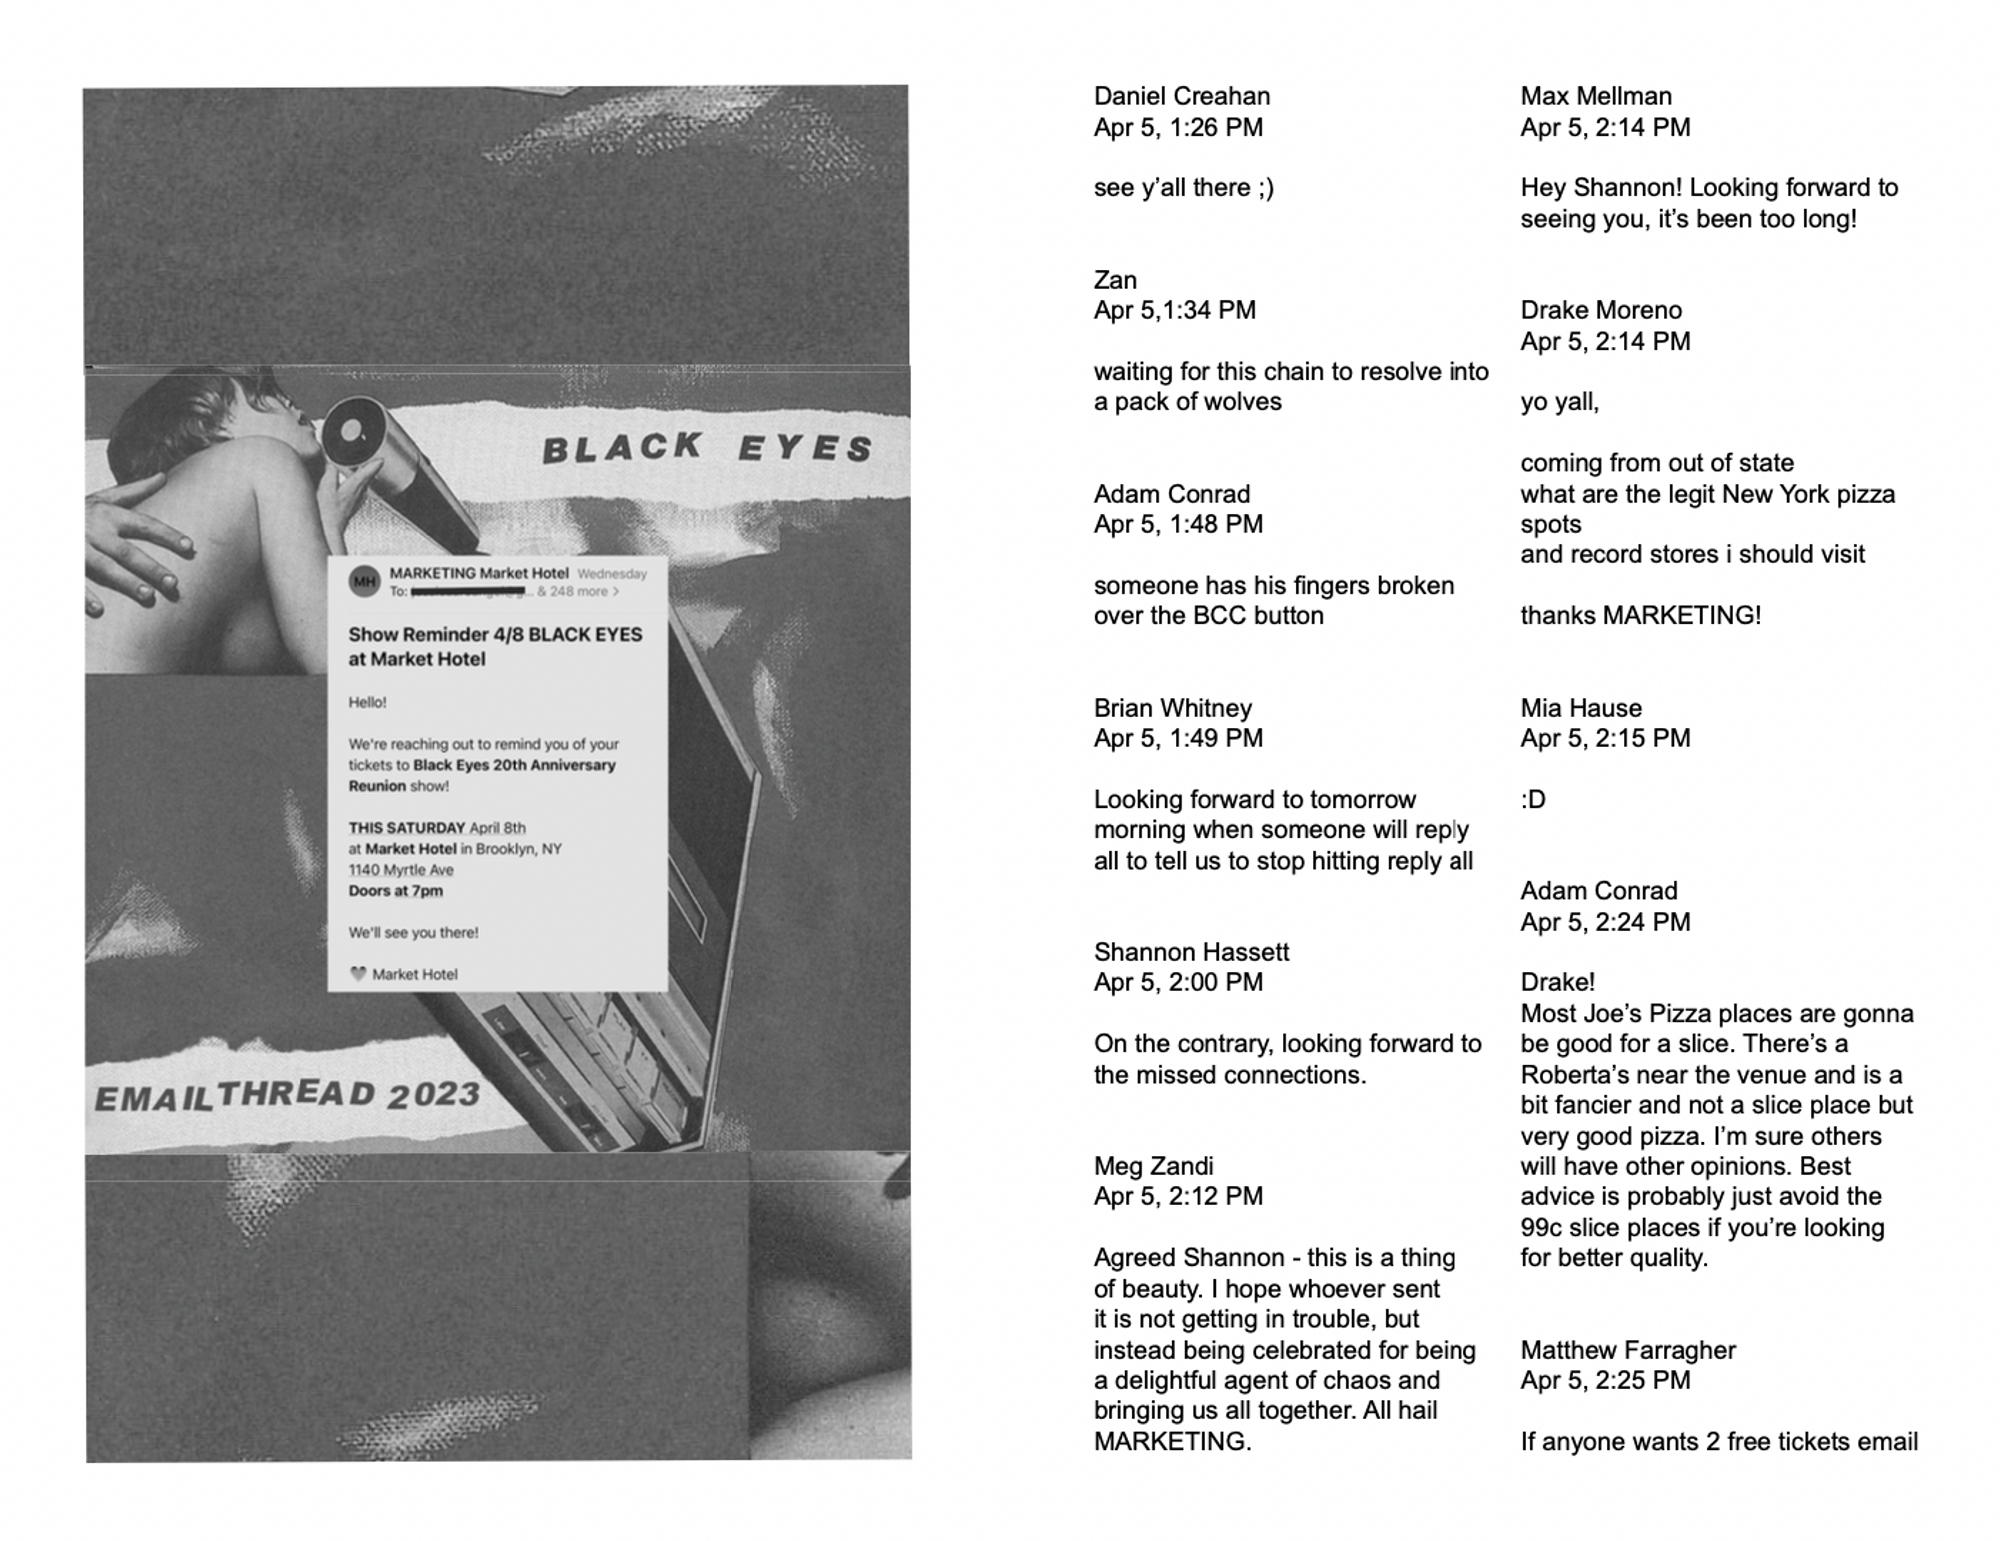 Screenshots of an email thread in zine-form. 